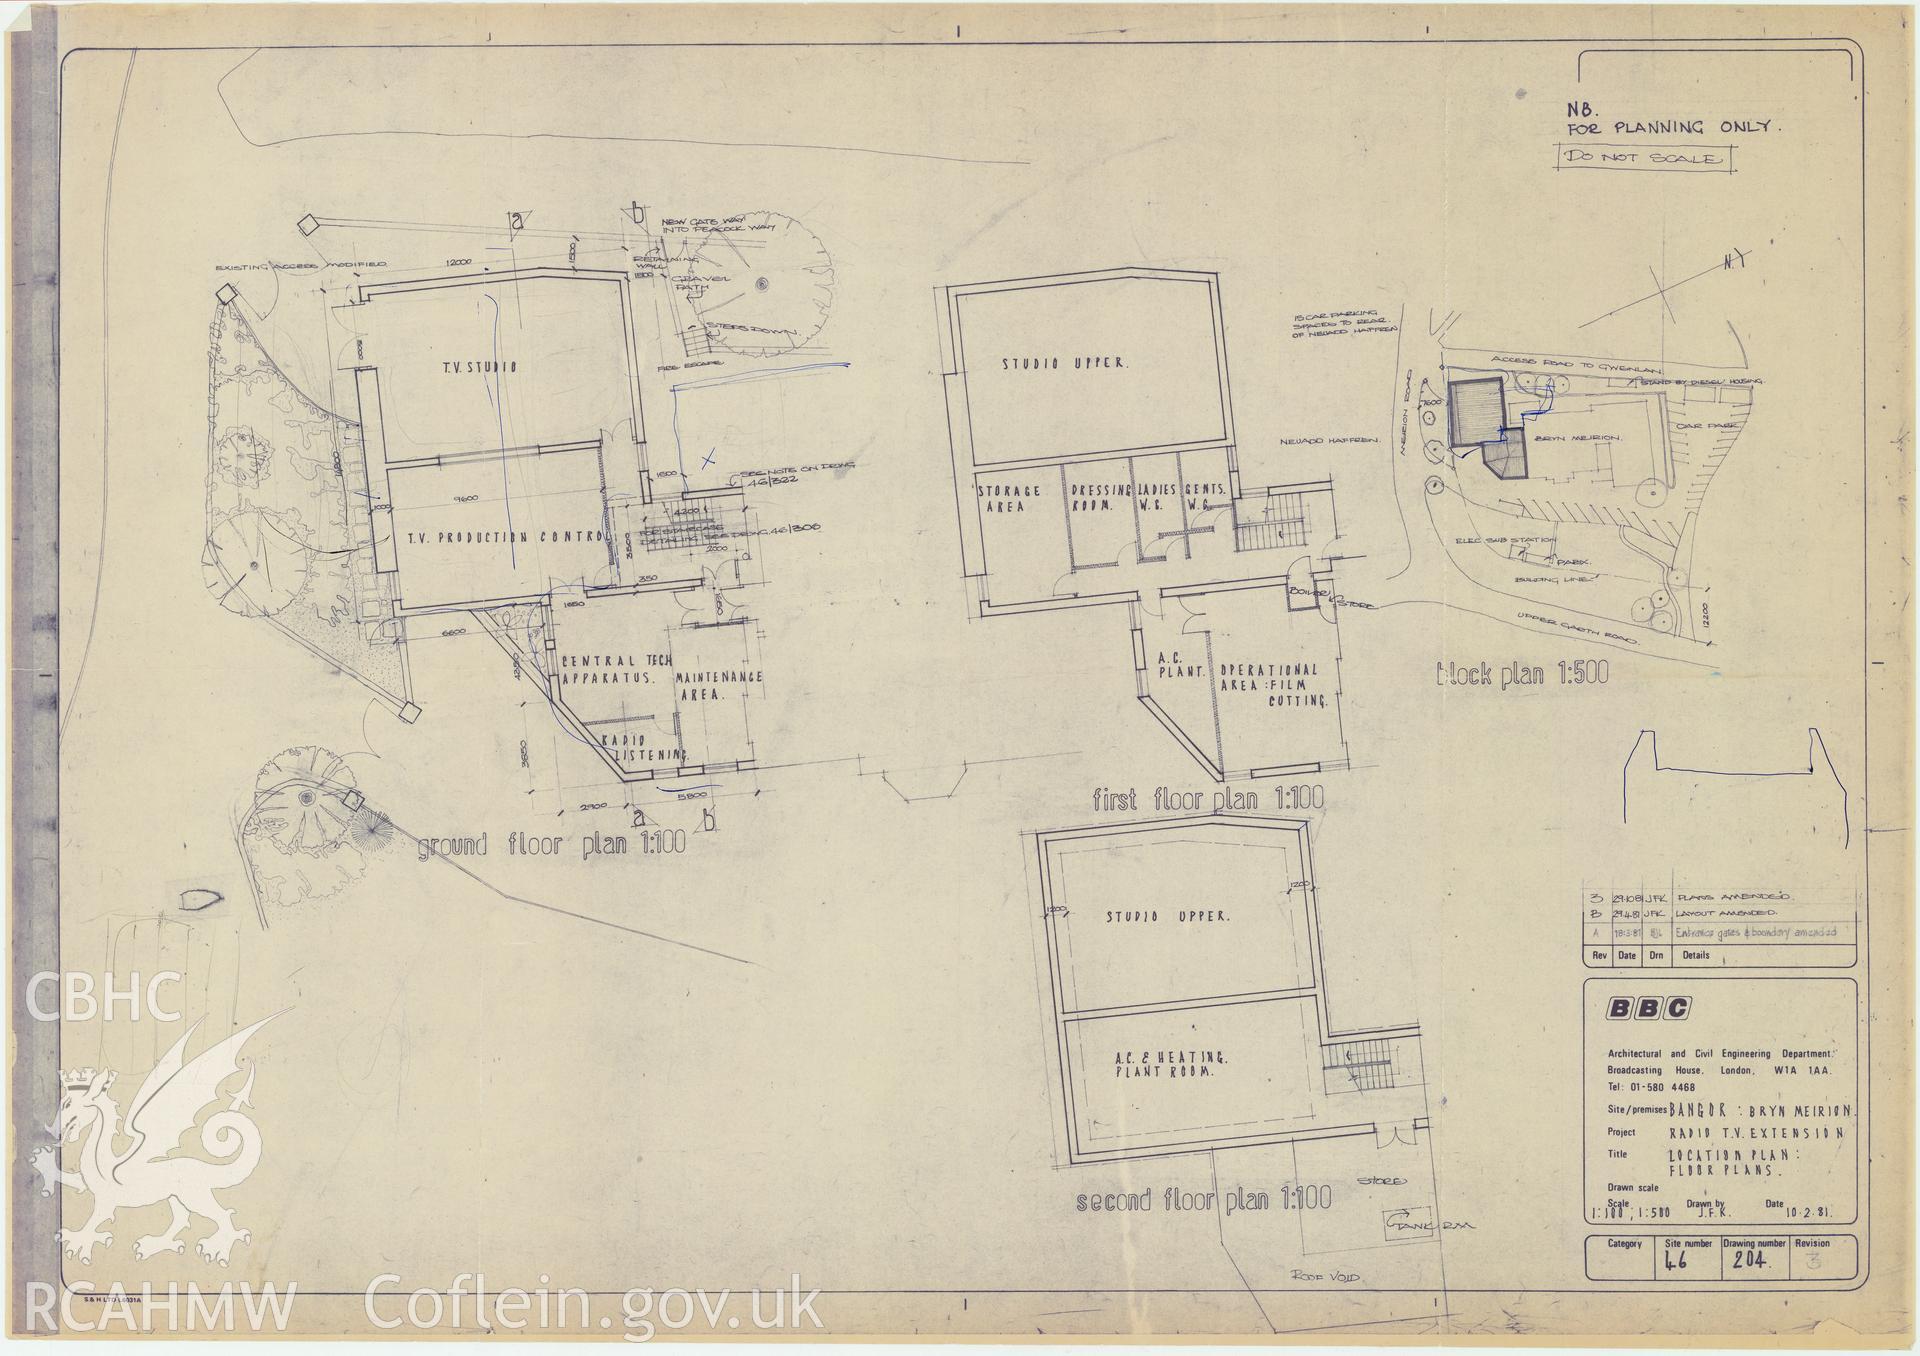 BBC premises, Broadcasting House, Bangor - block plan and location plan at Bryn Meirion. Drawing No. 46/204 R3. February 1981.